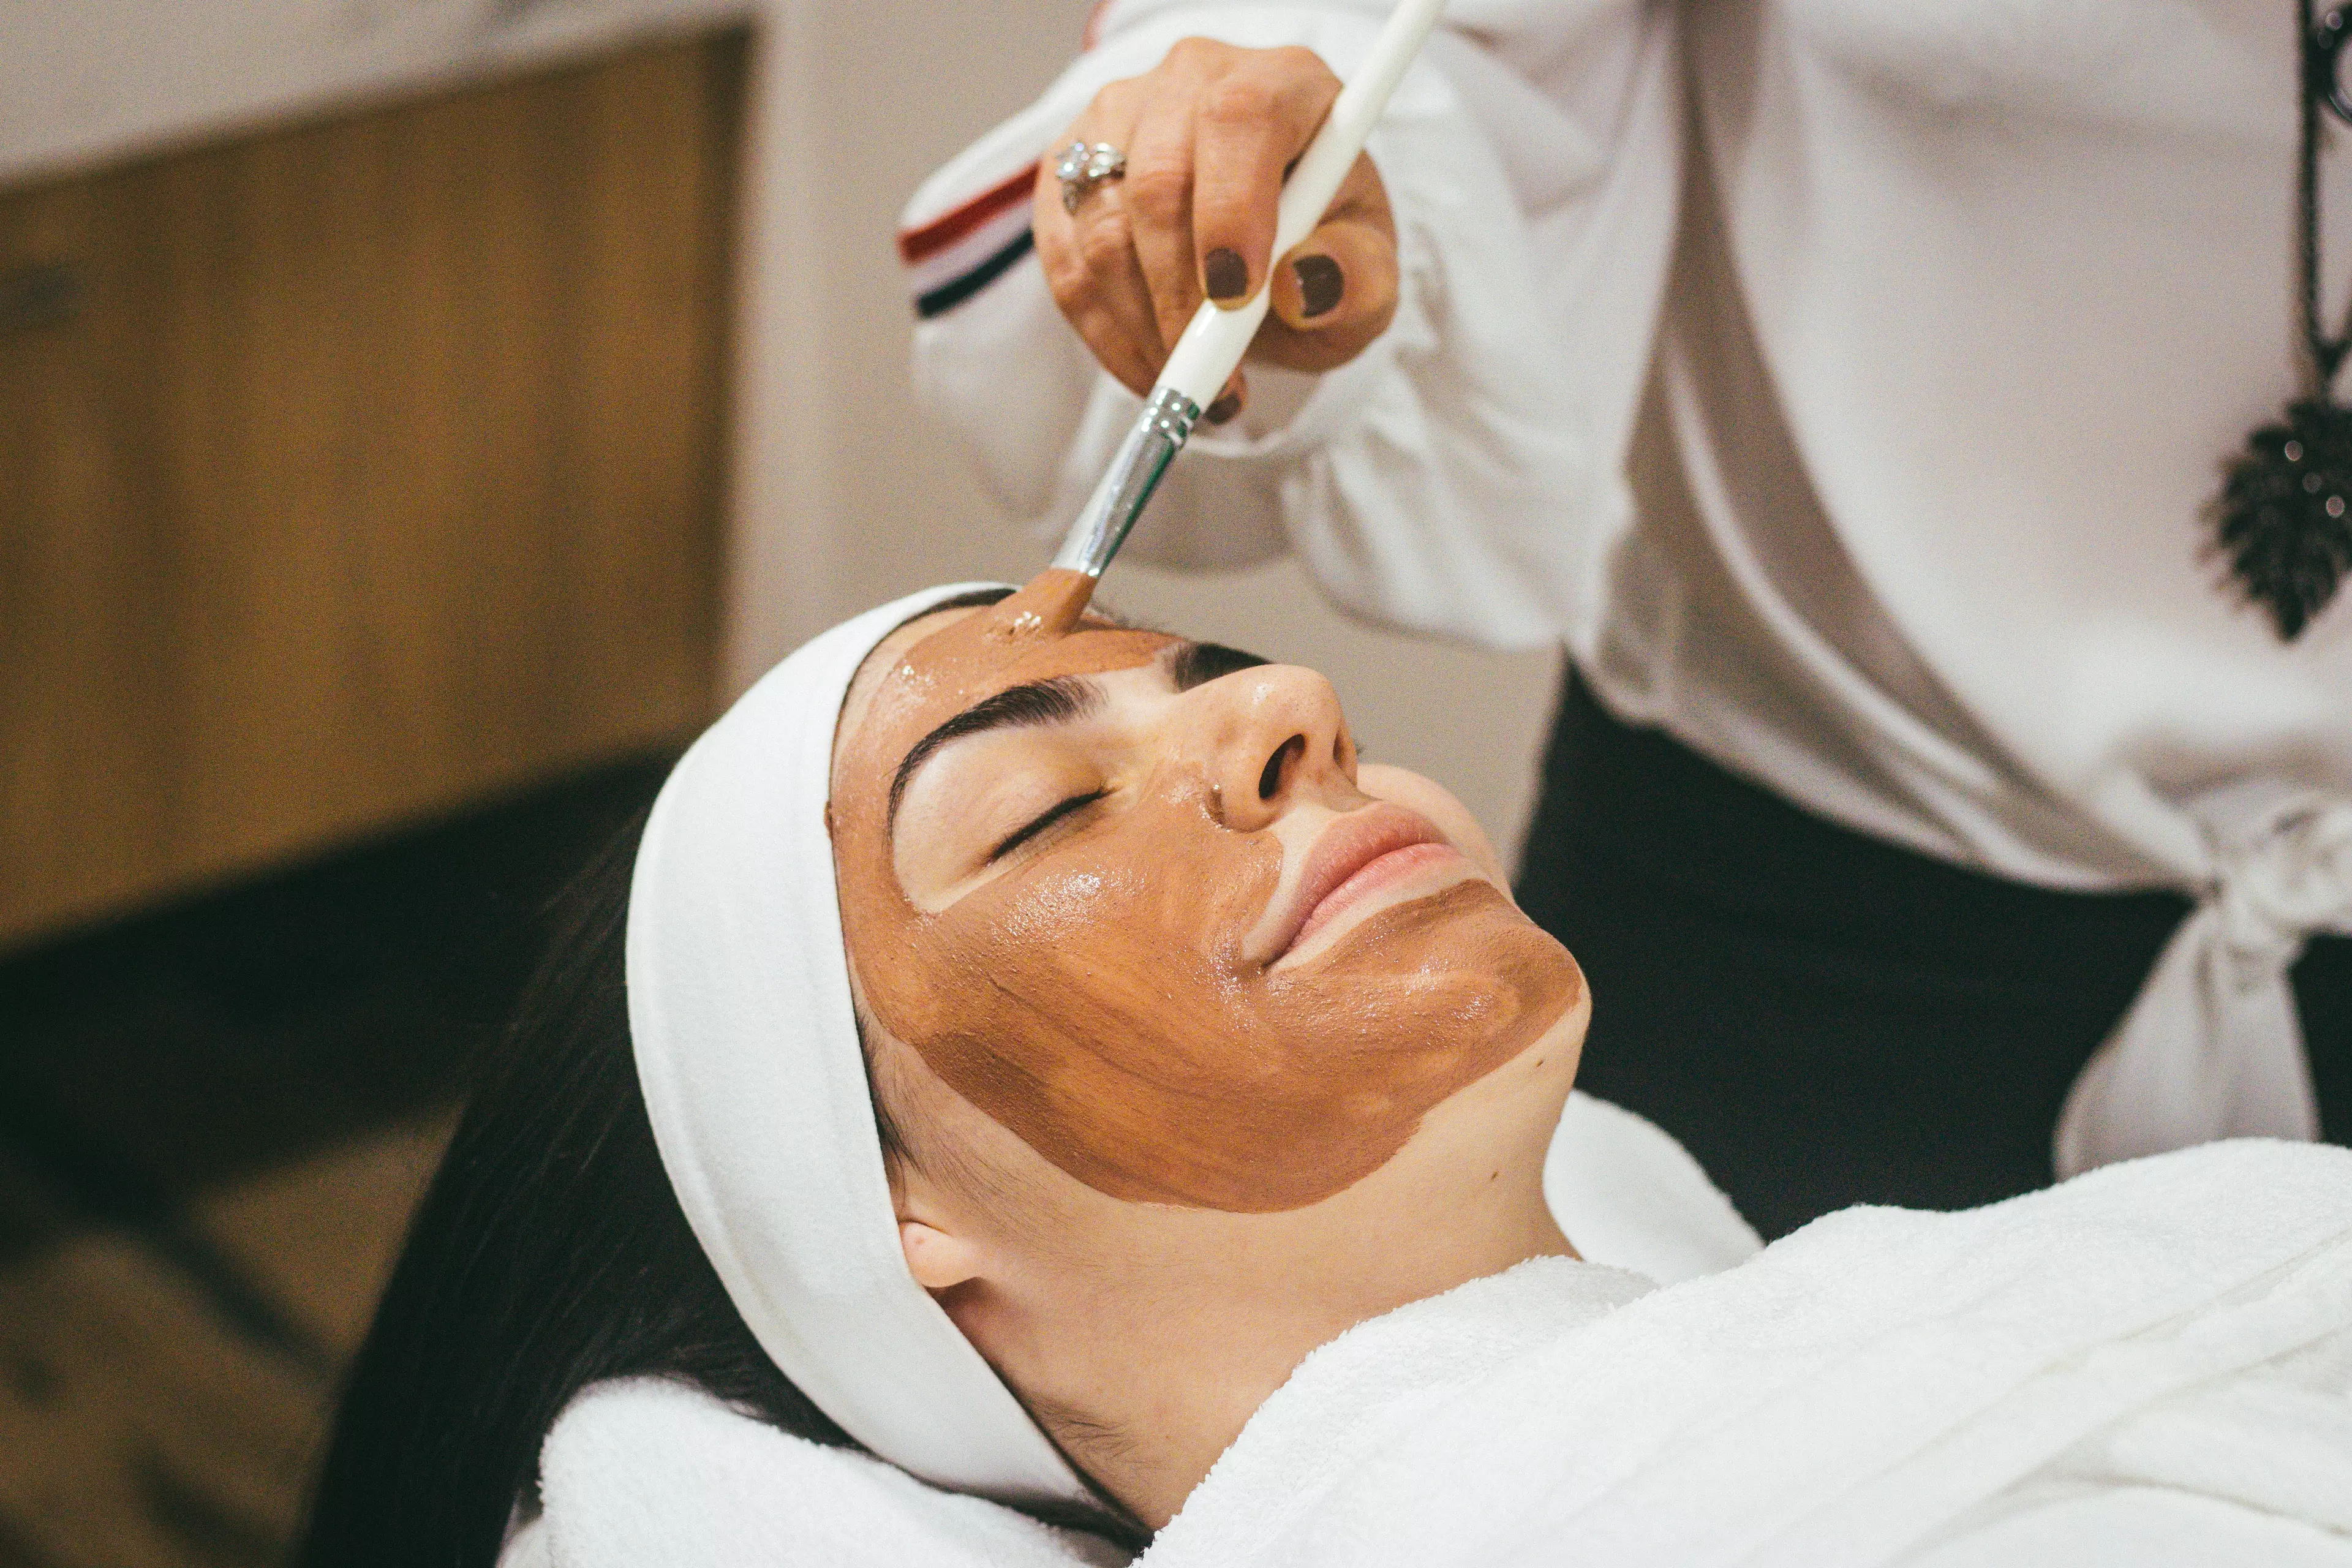 Anything classed as a facial treatment is still prohibited under government guidelines (